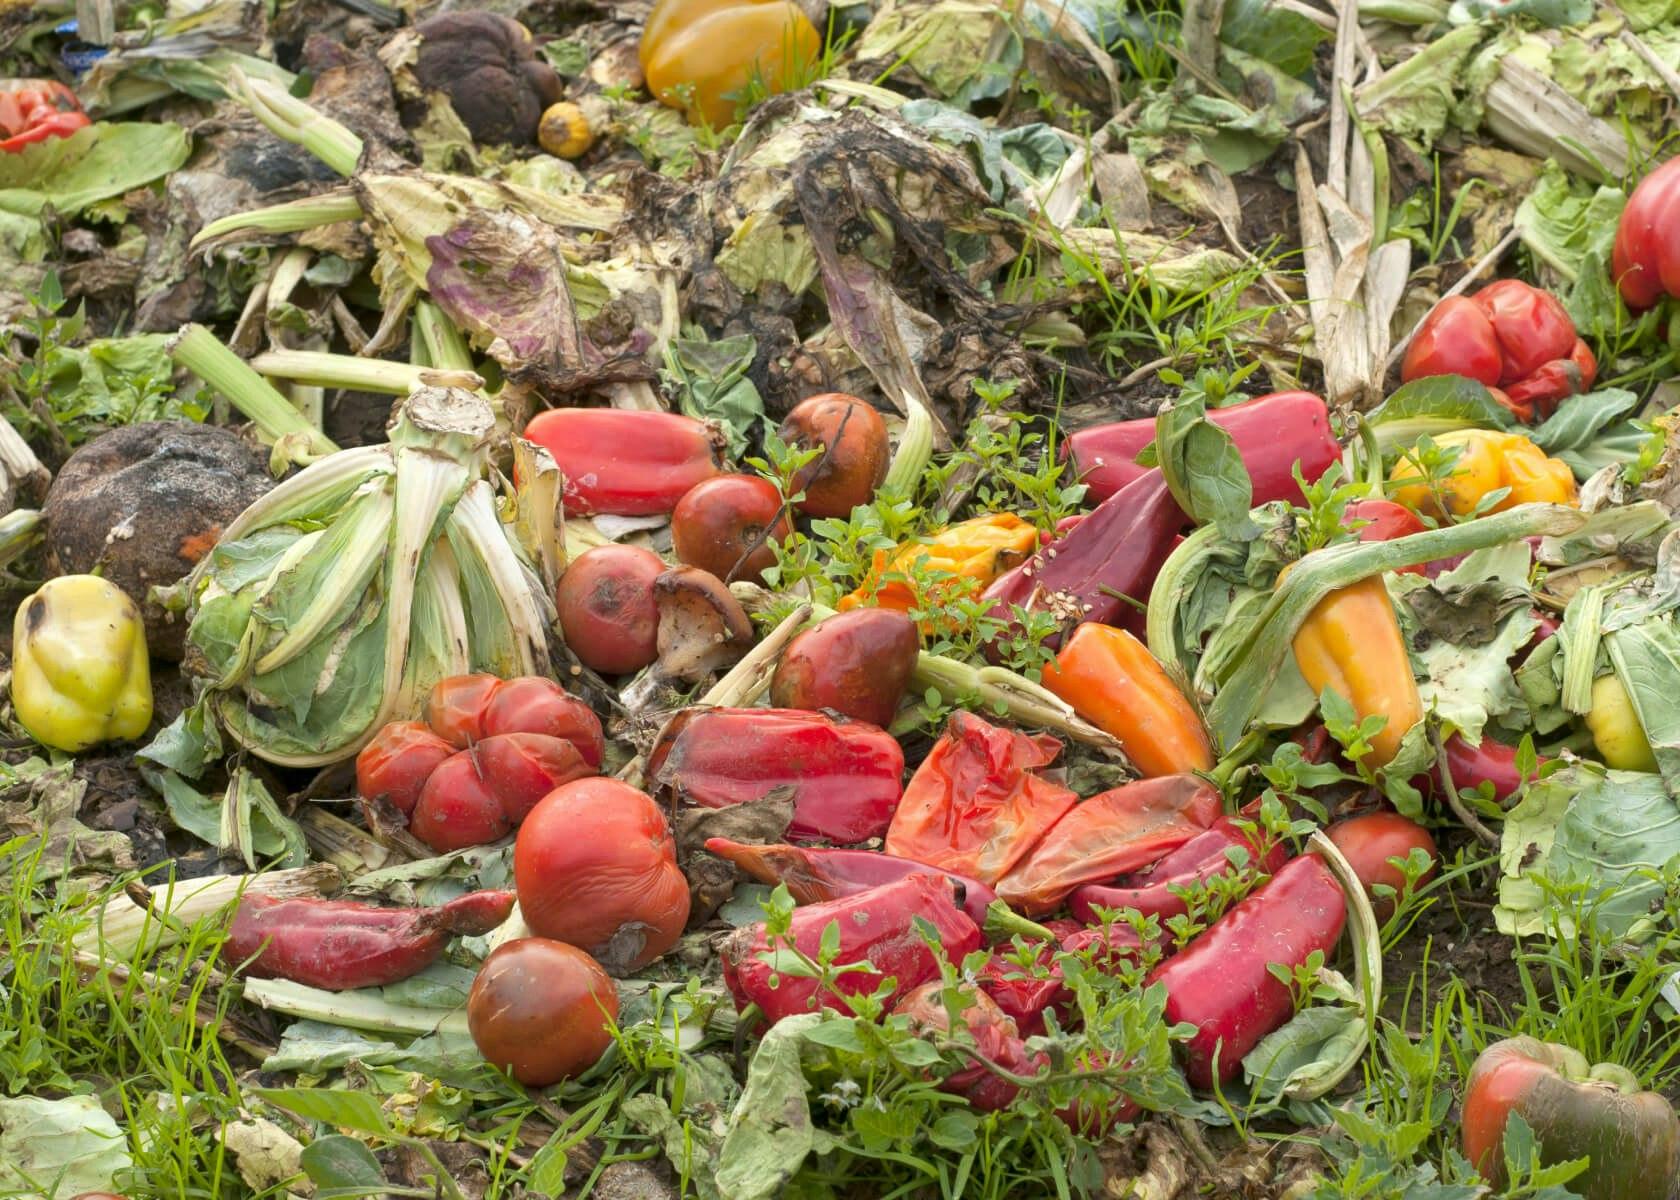 Food waste as part of organic waste recycling to create renewable energy